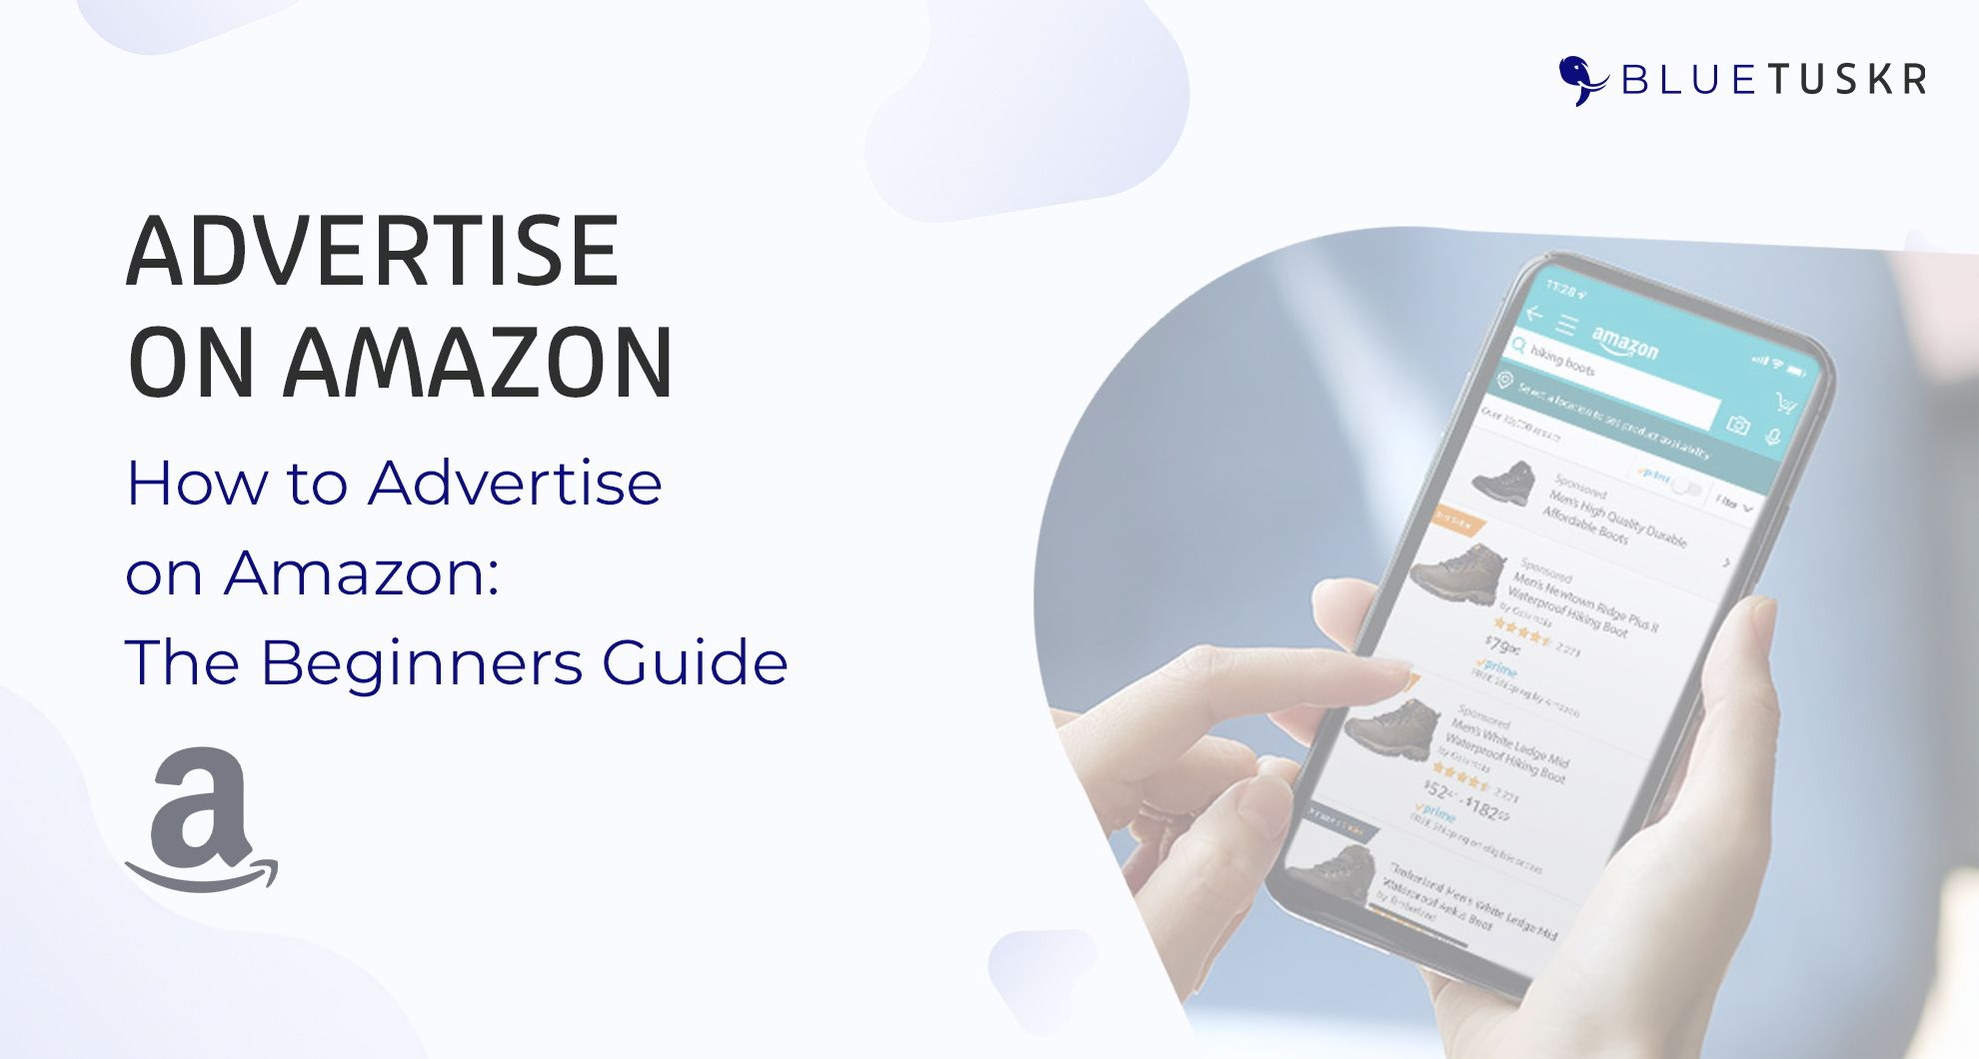 How to Advertise on Amazon: The Beginners Guide